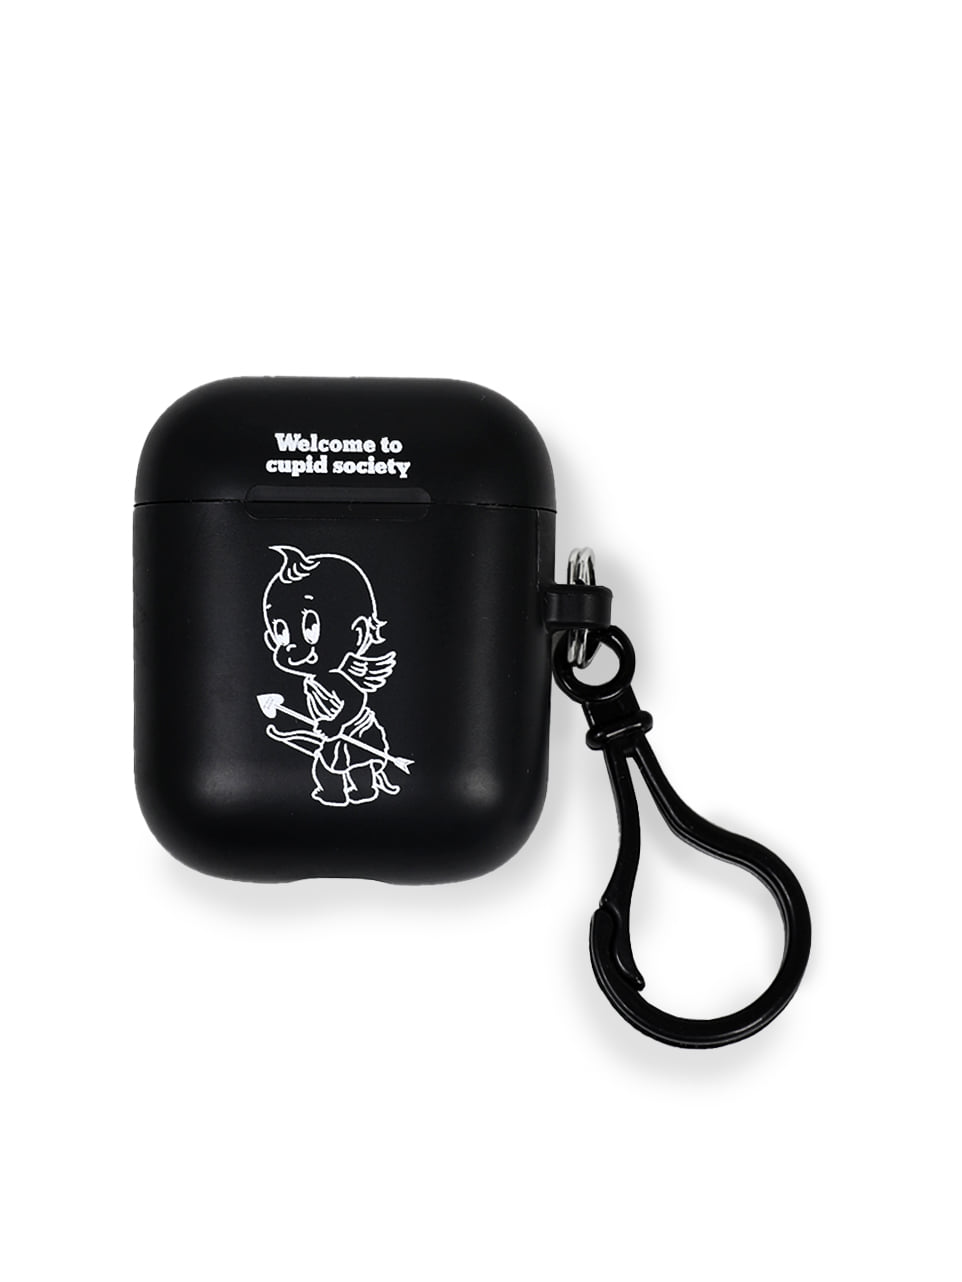 Cupid society AirPods case TPU black